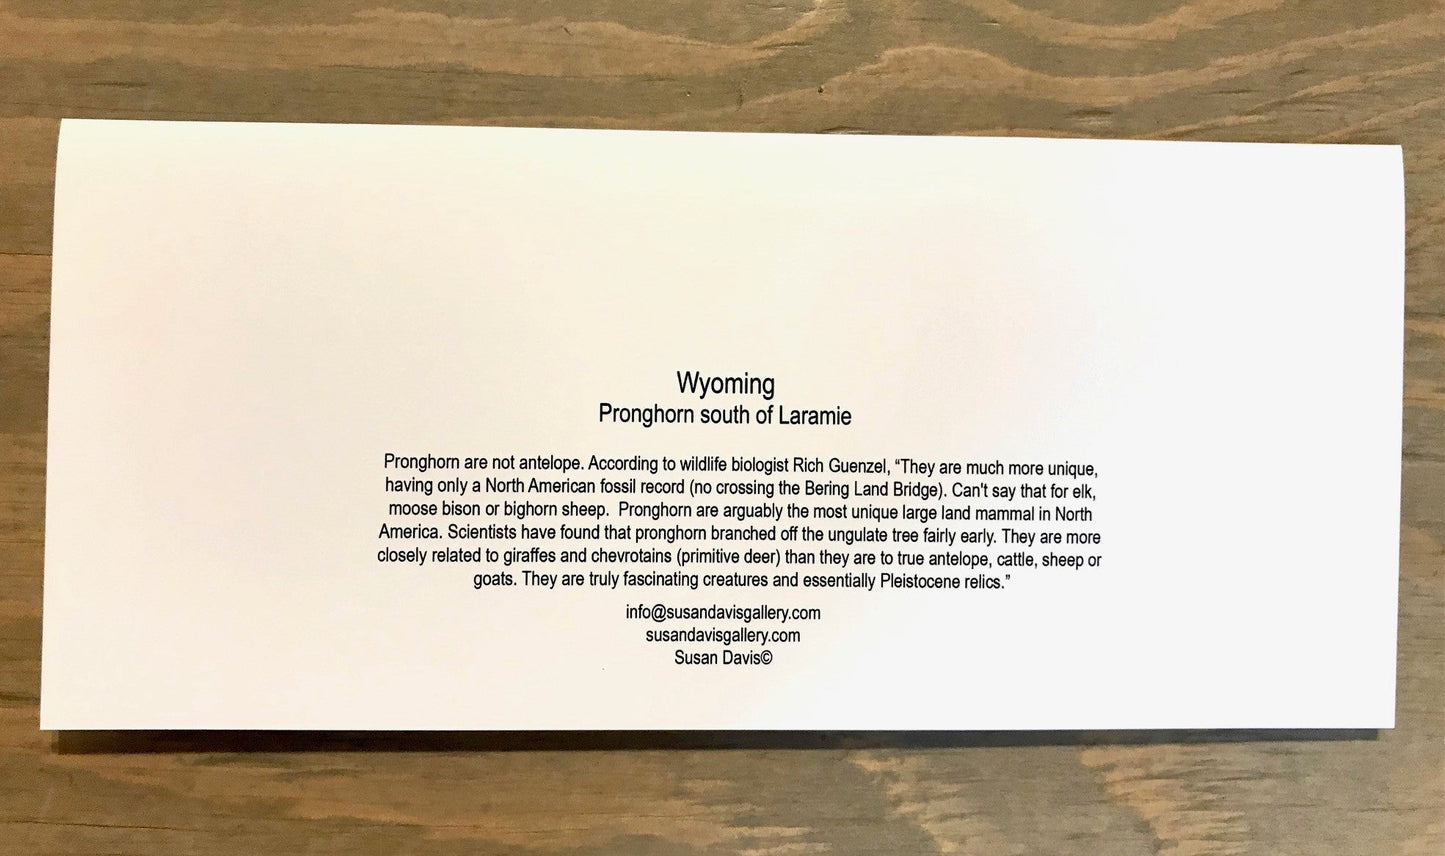 Information found on the back of the Pronghorn South of Laramie greeting card